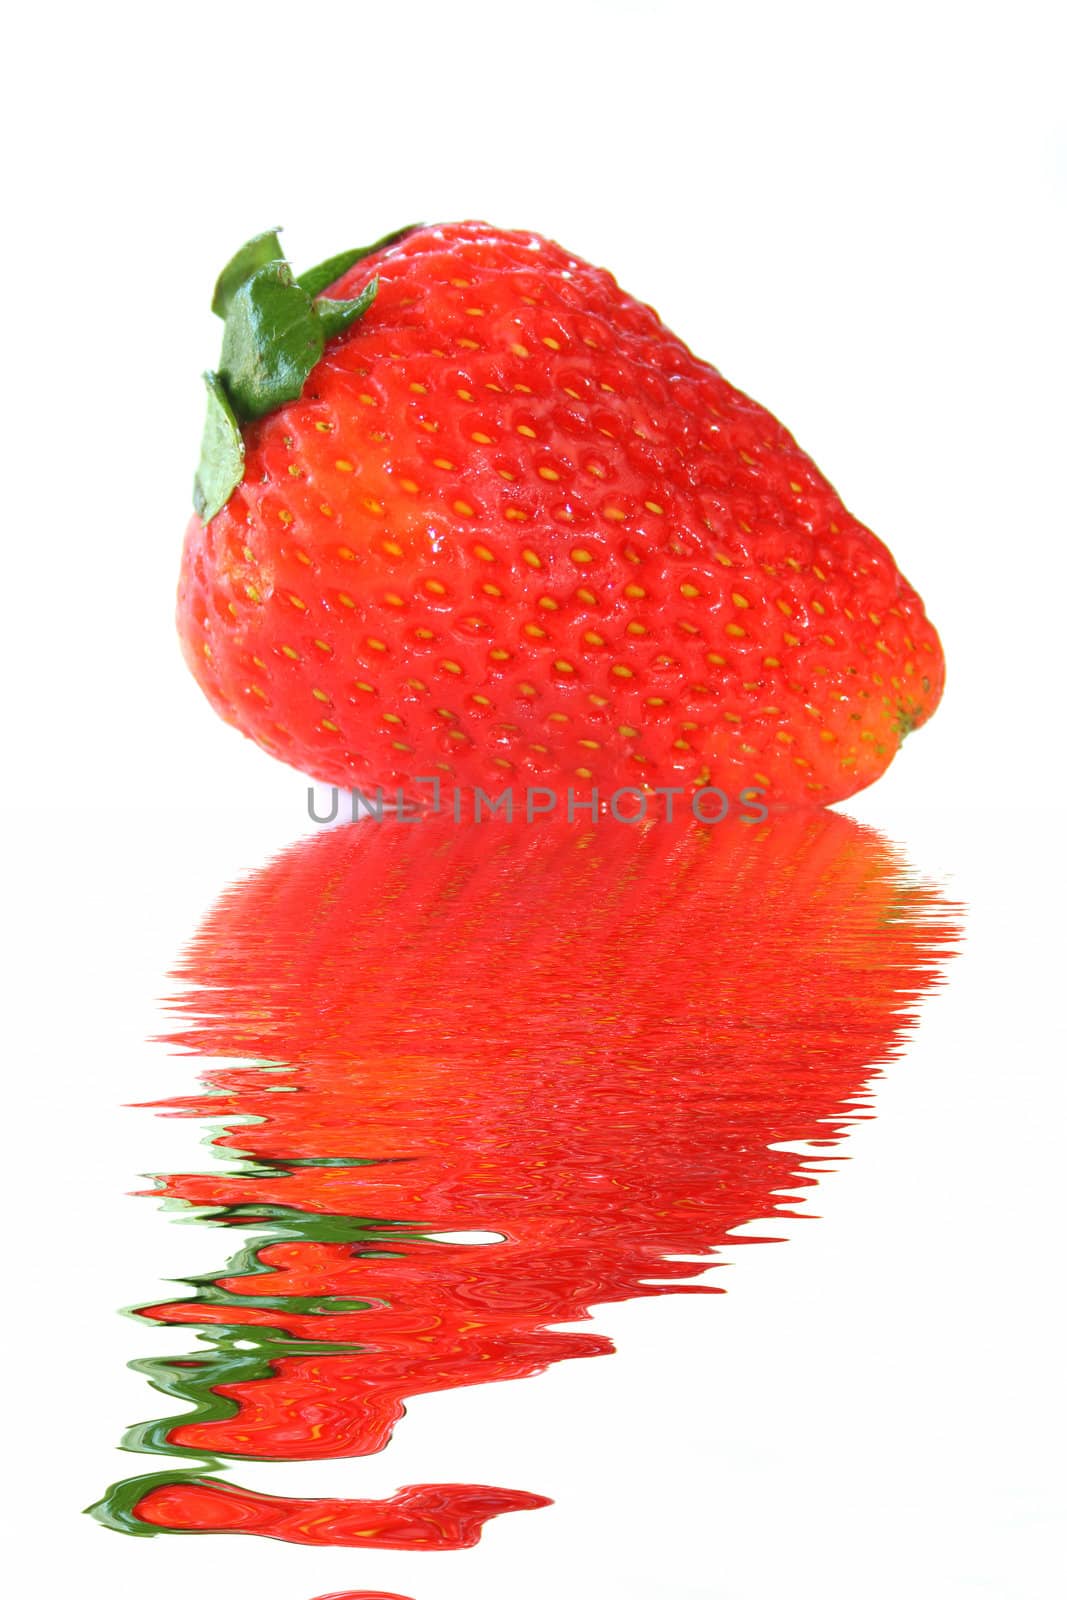 A fresh strawberry isolated on a white background with a reflection in water.